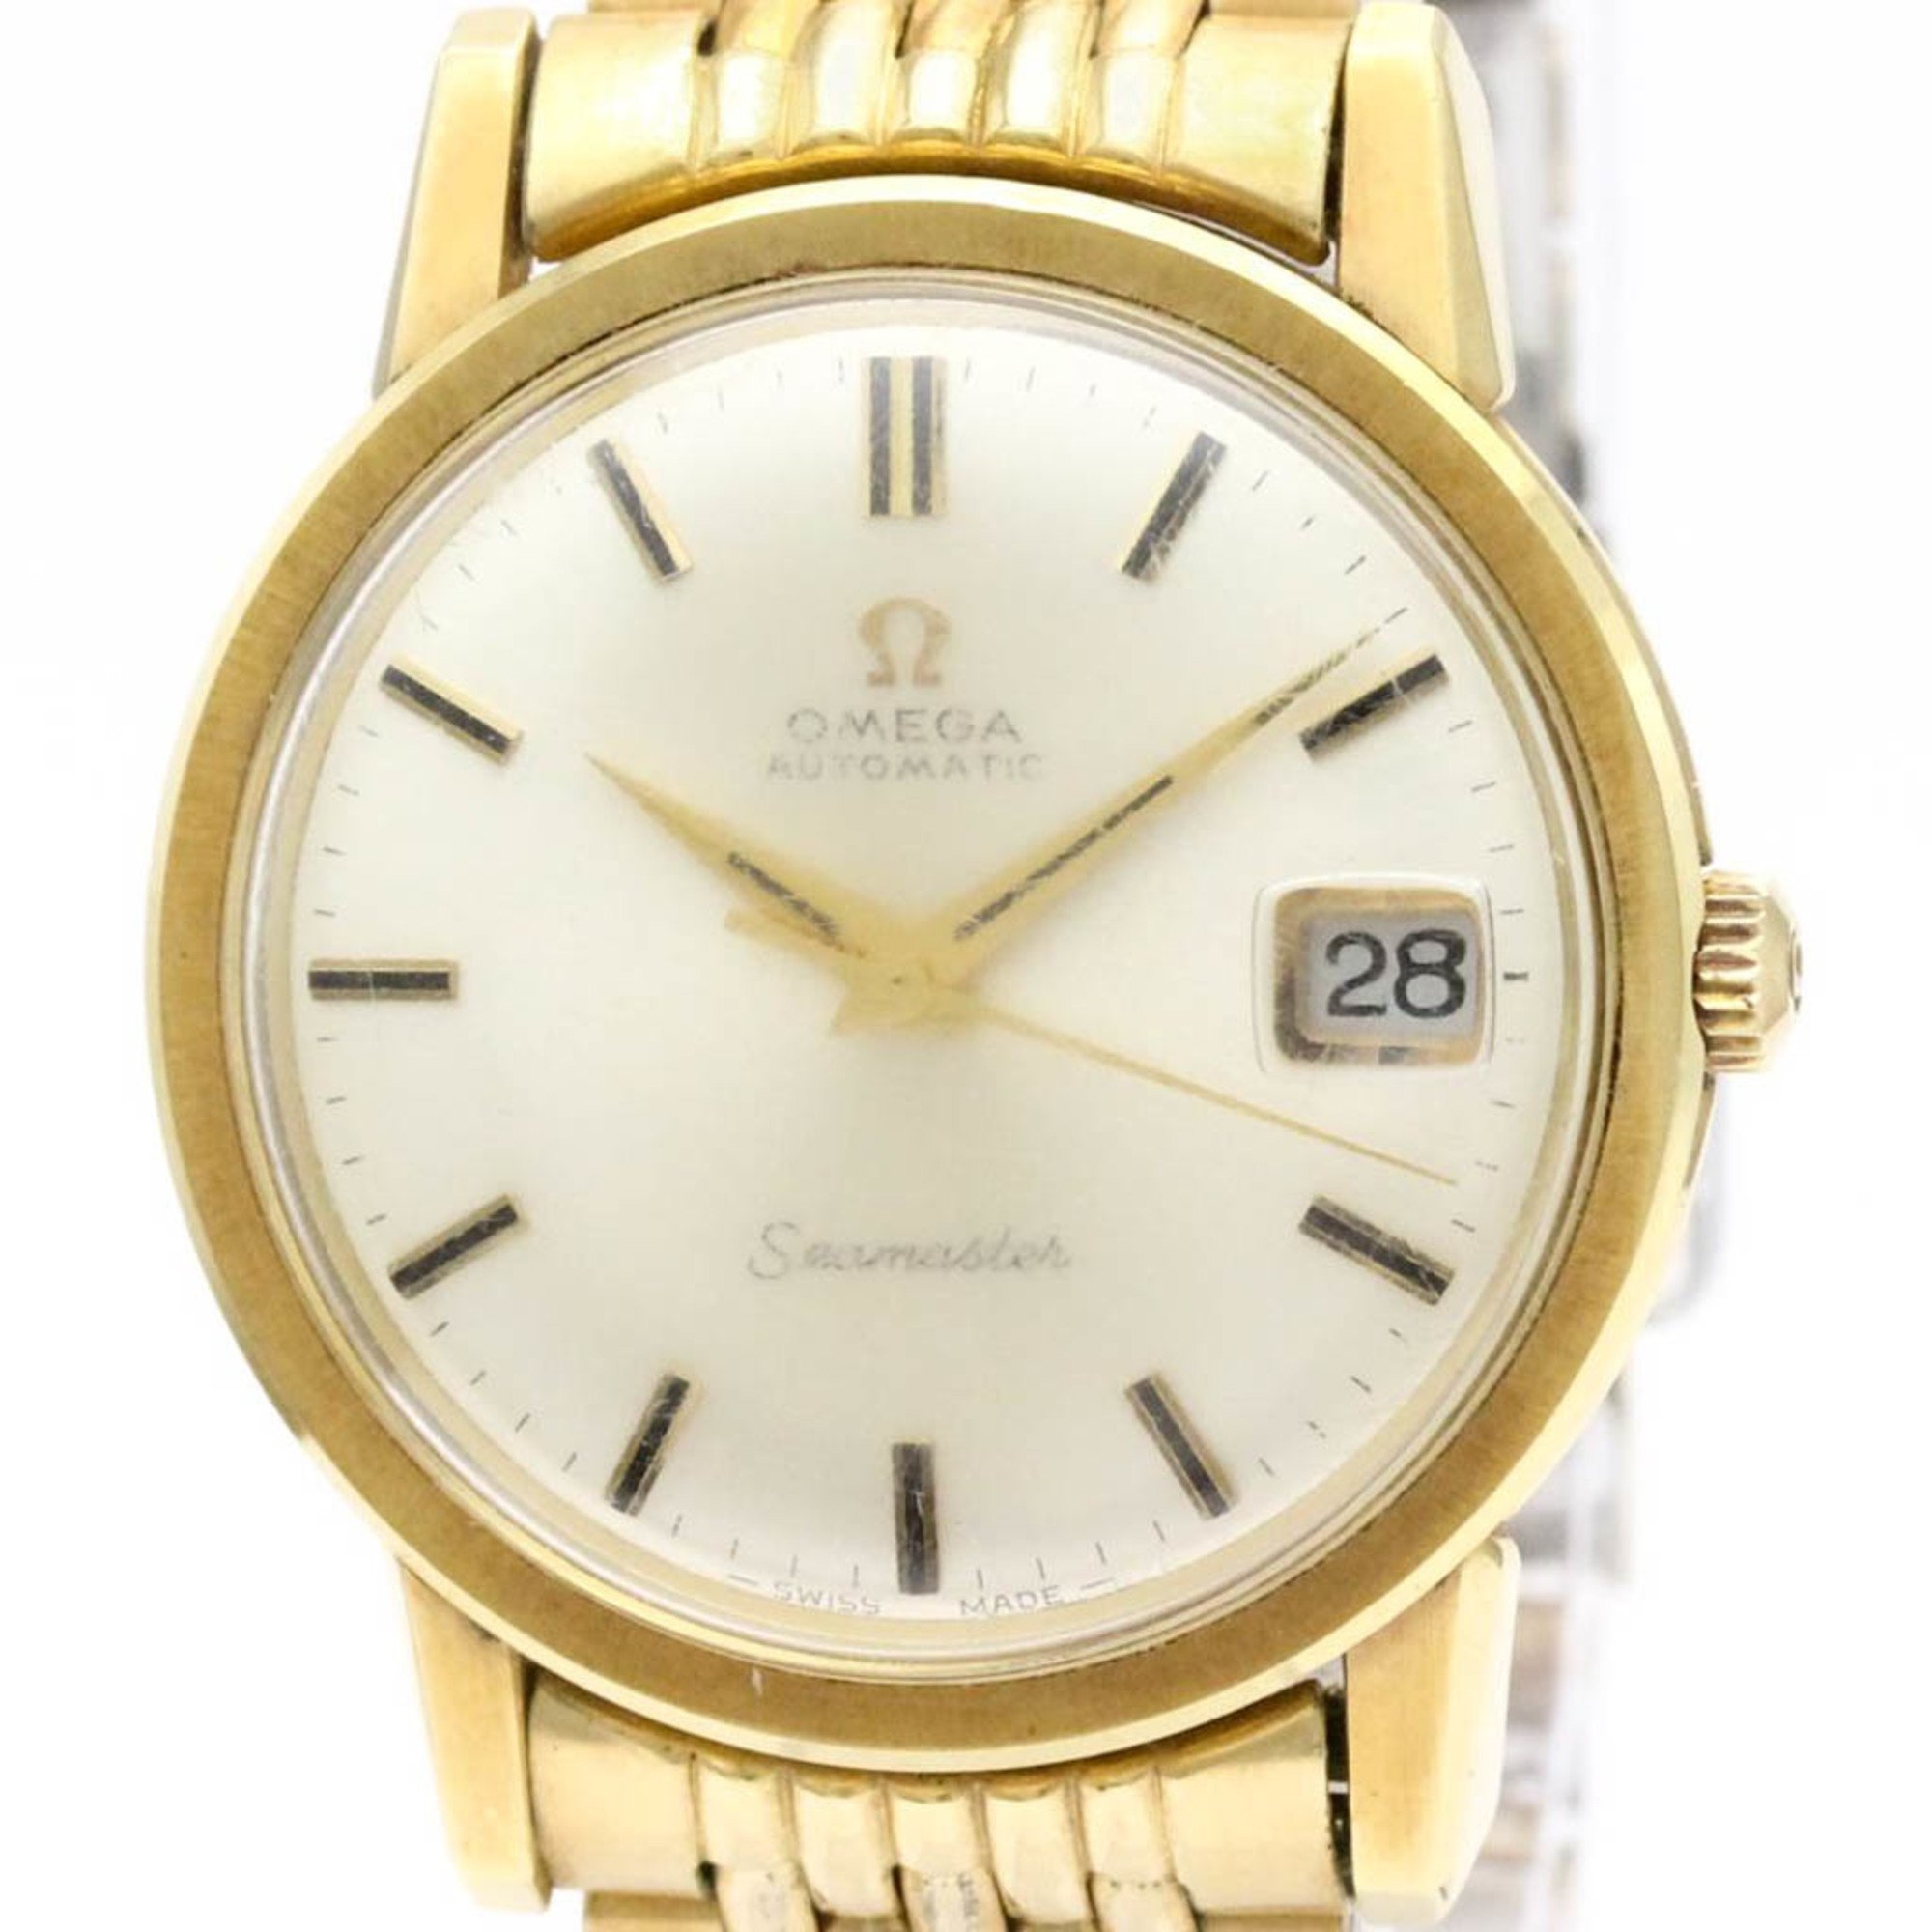 Vintage OMEGA Seamaster Cal.565 Gold Plated Automatic Watch 166.003 BF555117